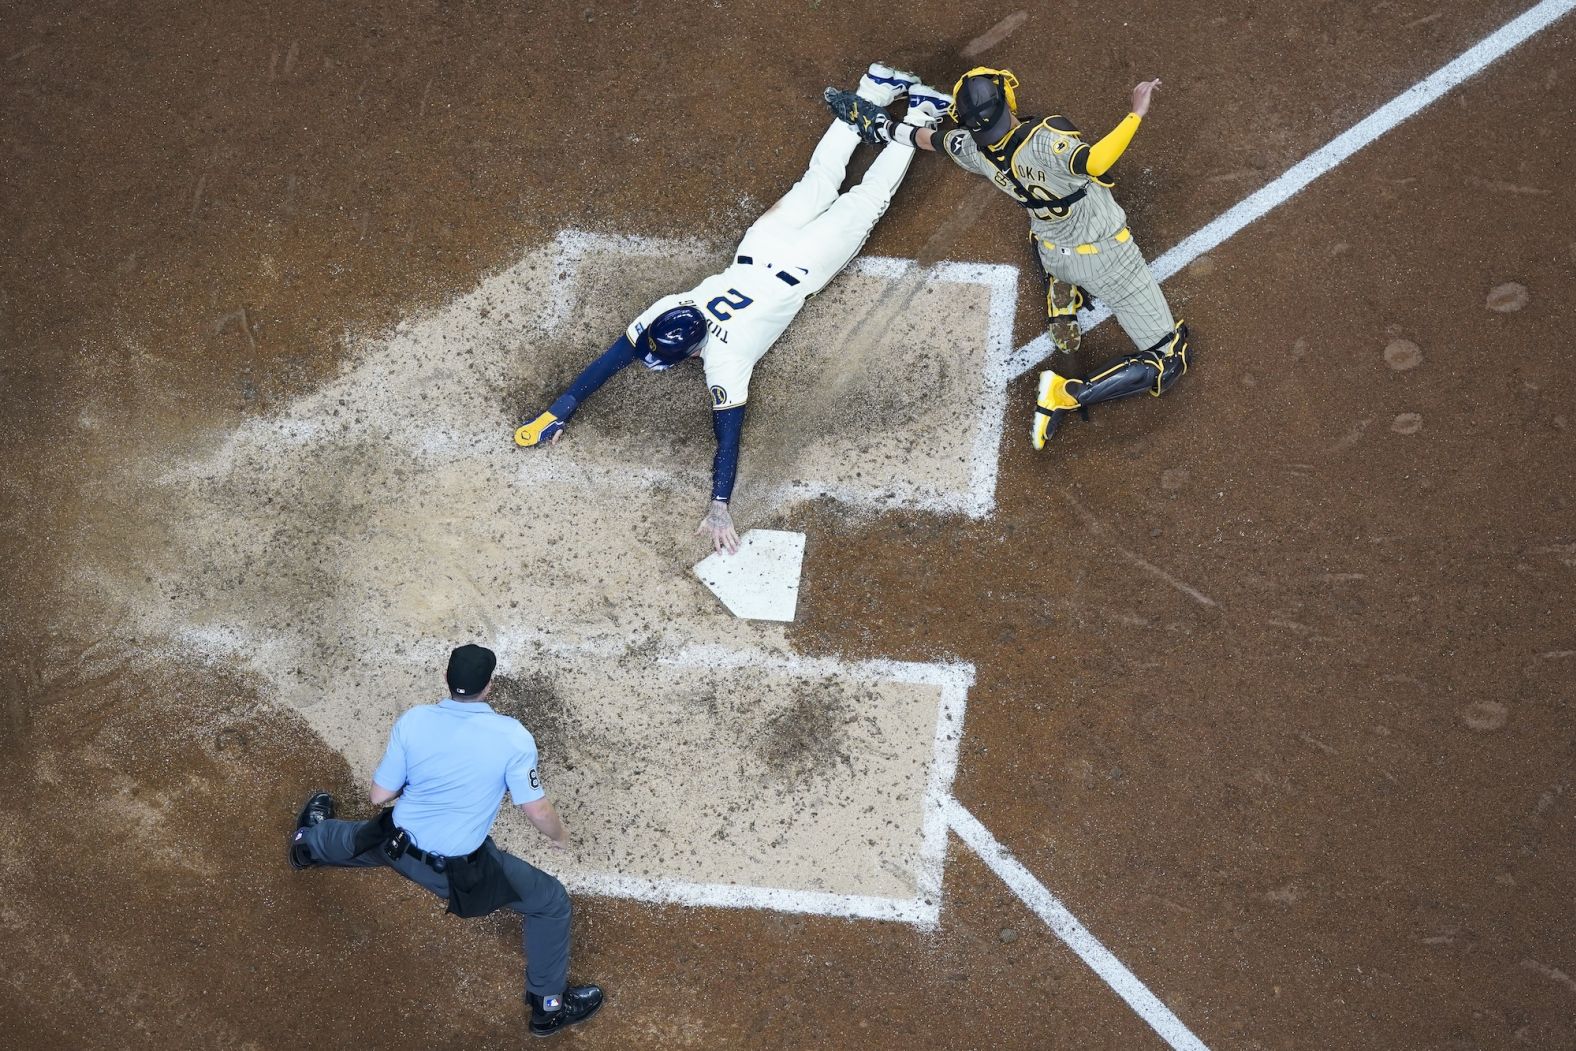 Milwaukee Brewers second baseman Brice Turang slides safely past San Diego Padres catcher Kyle Higashioka during a game in Milwaukee on Wednesday, April 17.